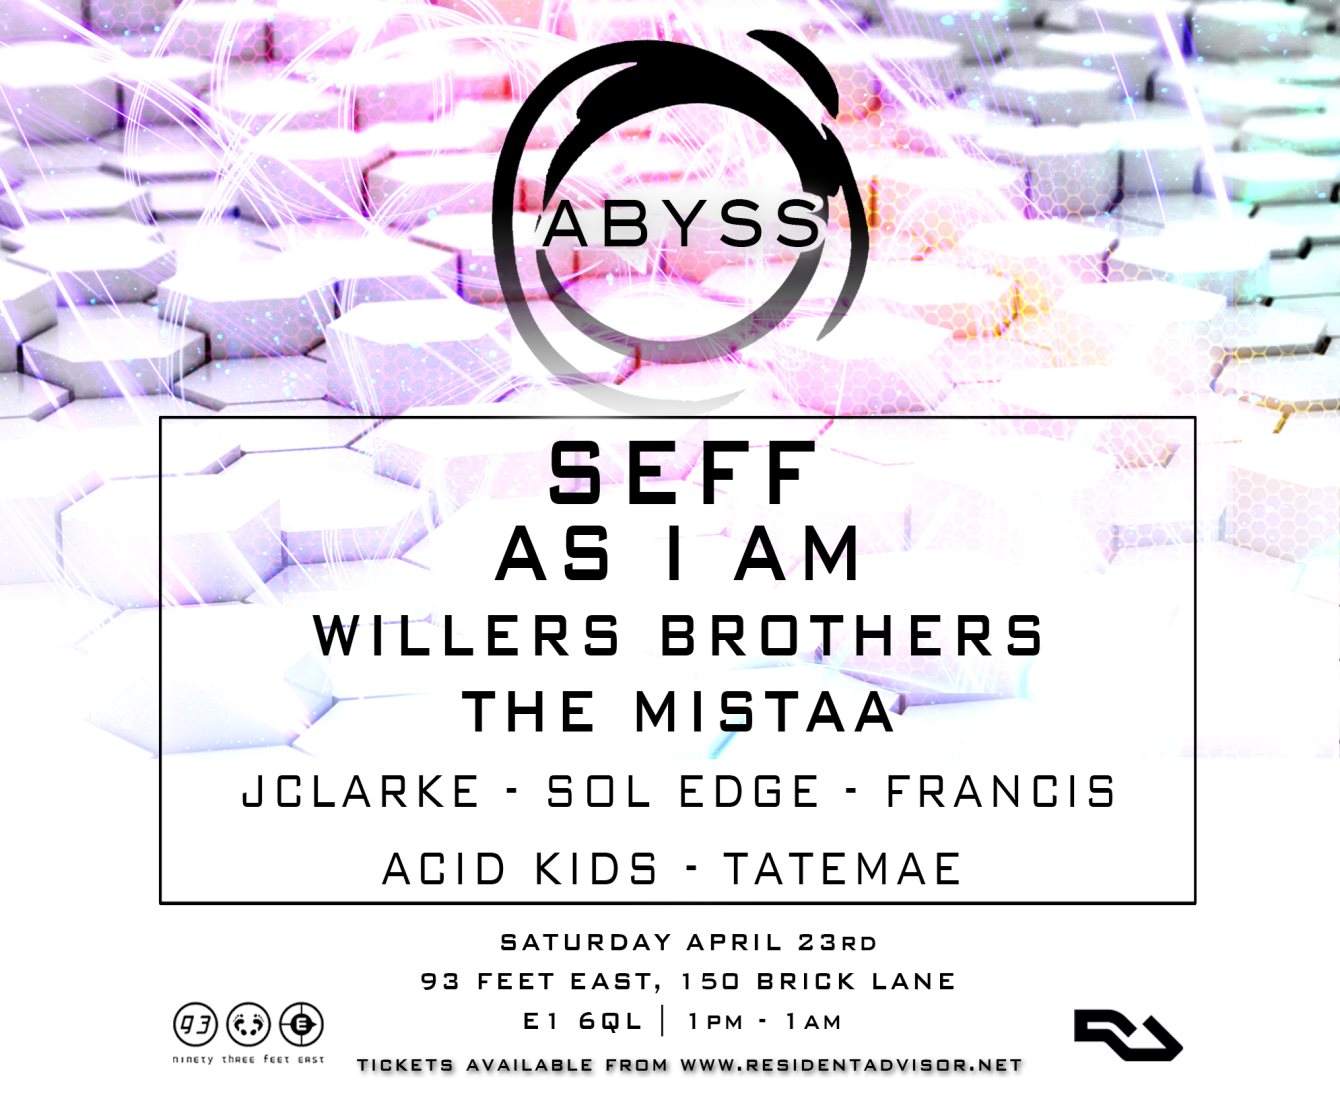 Abyss: Day/Night Party - Seff, AS I AM, Willers Brothers - Página frontal